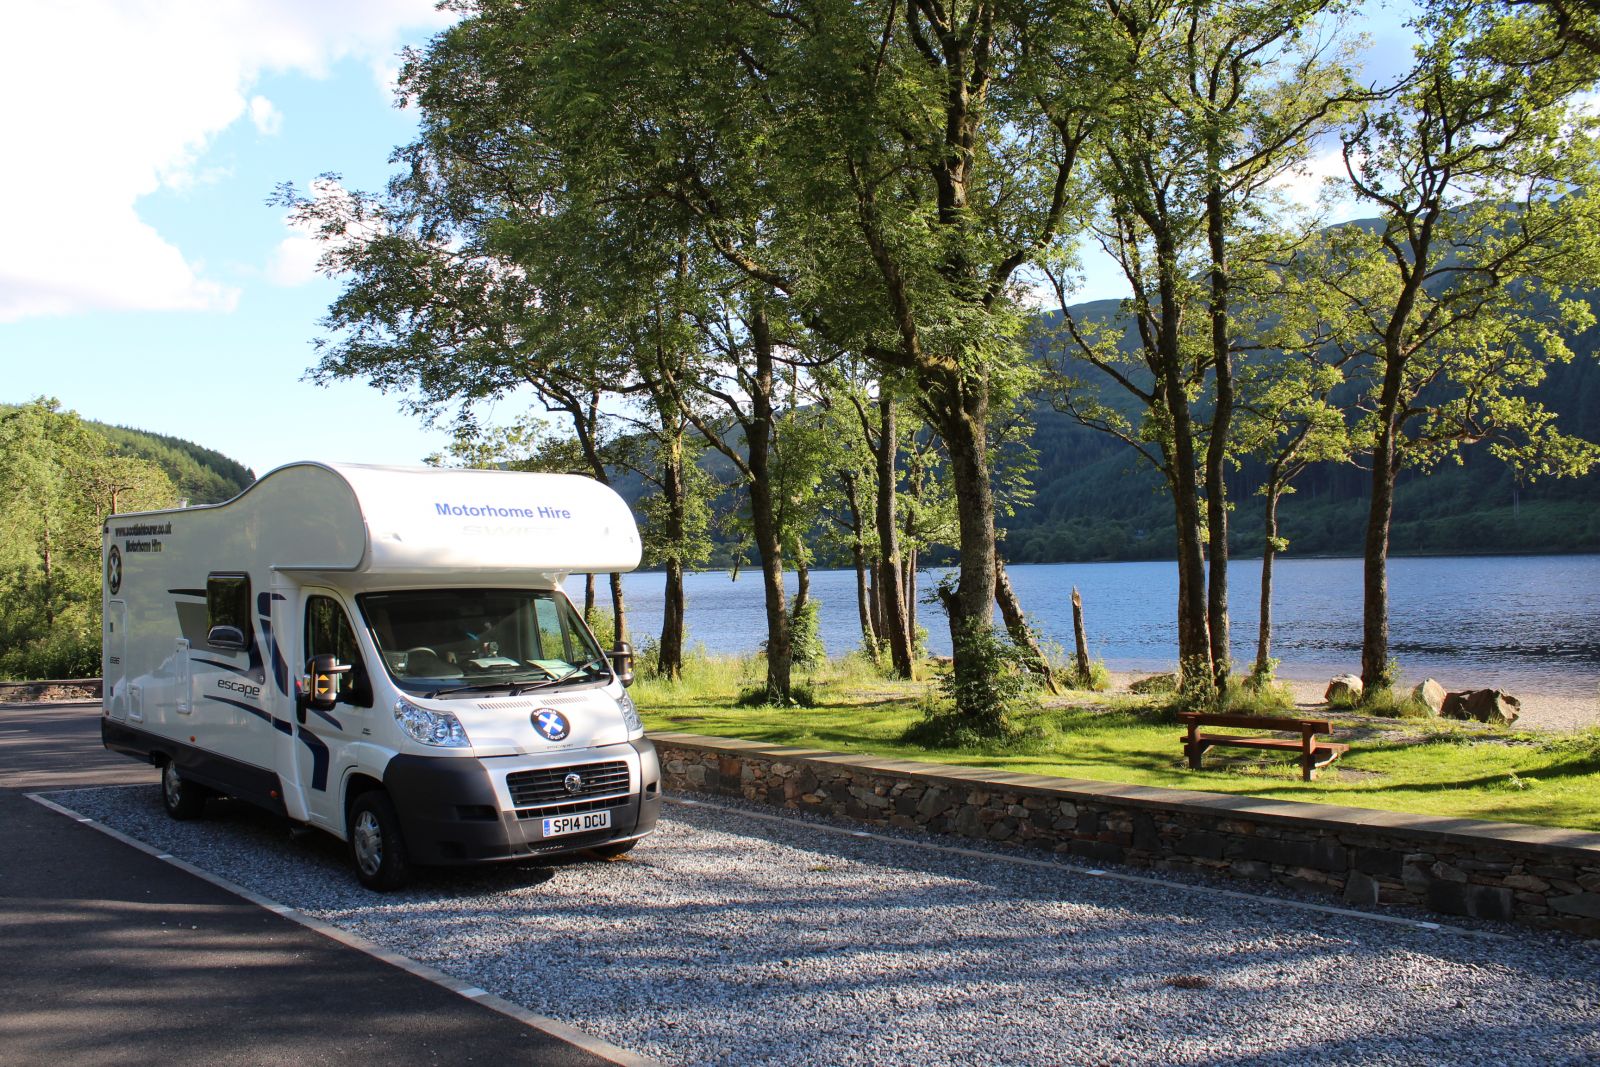 Enjoying the view of the loch from the motorhome